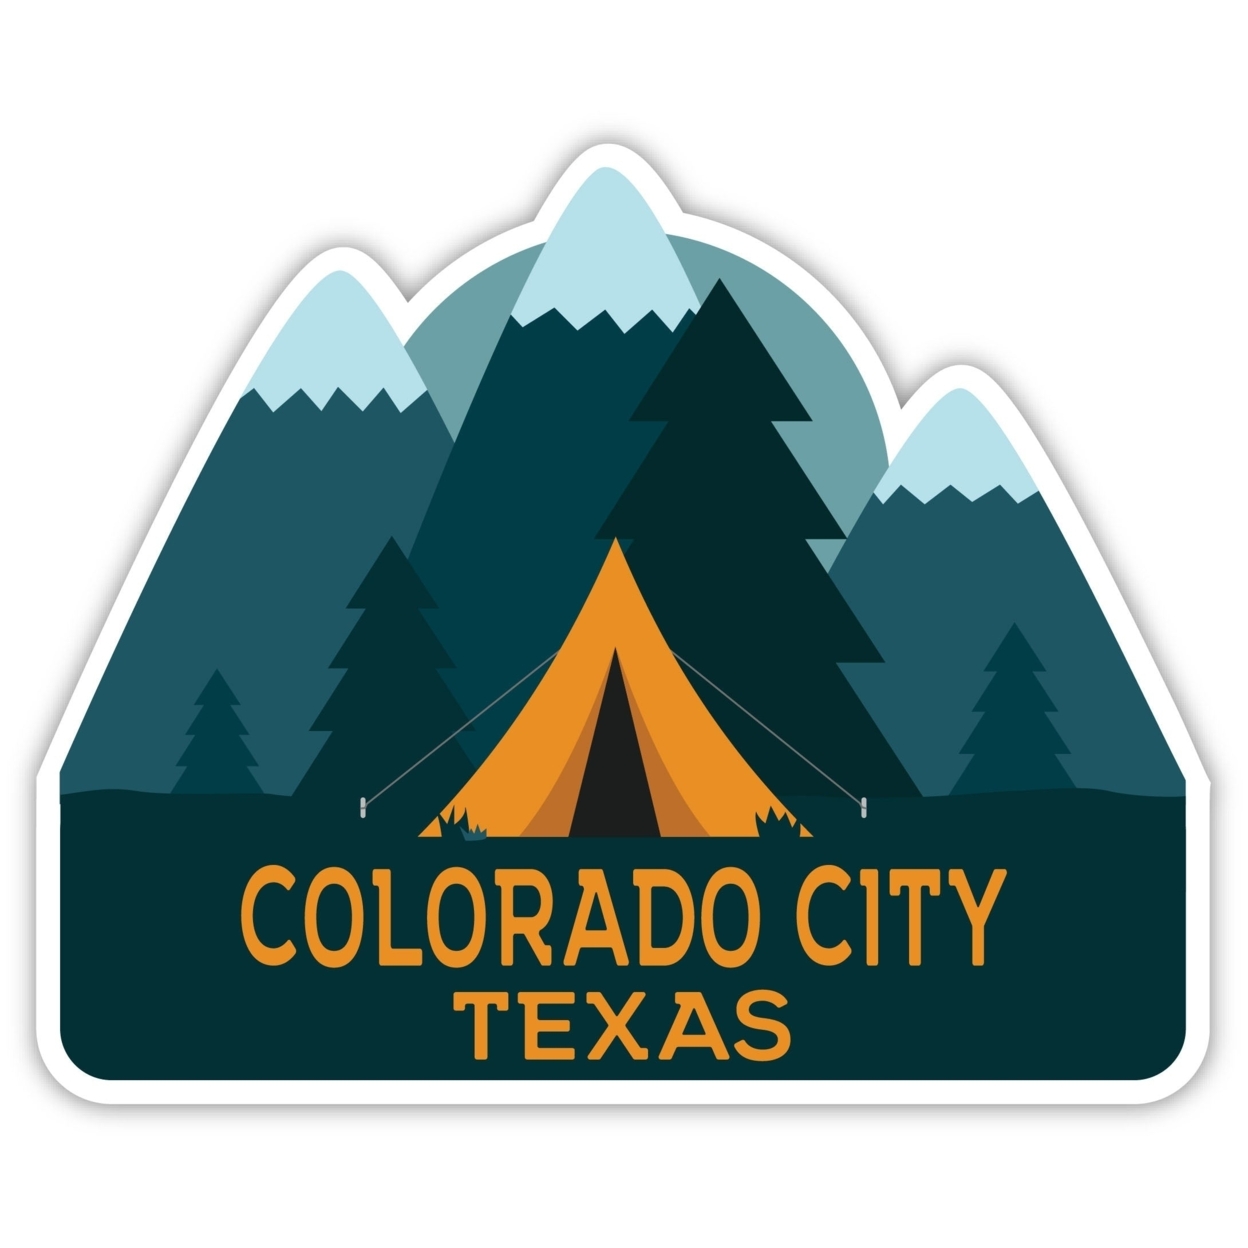 Colorado City Texas Souvenir Decorative Stickers (Choose Theme And Size) - 4-Pack, 4-Inch, Tent